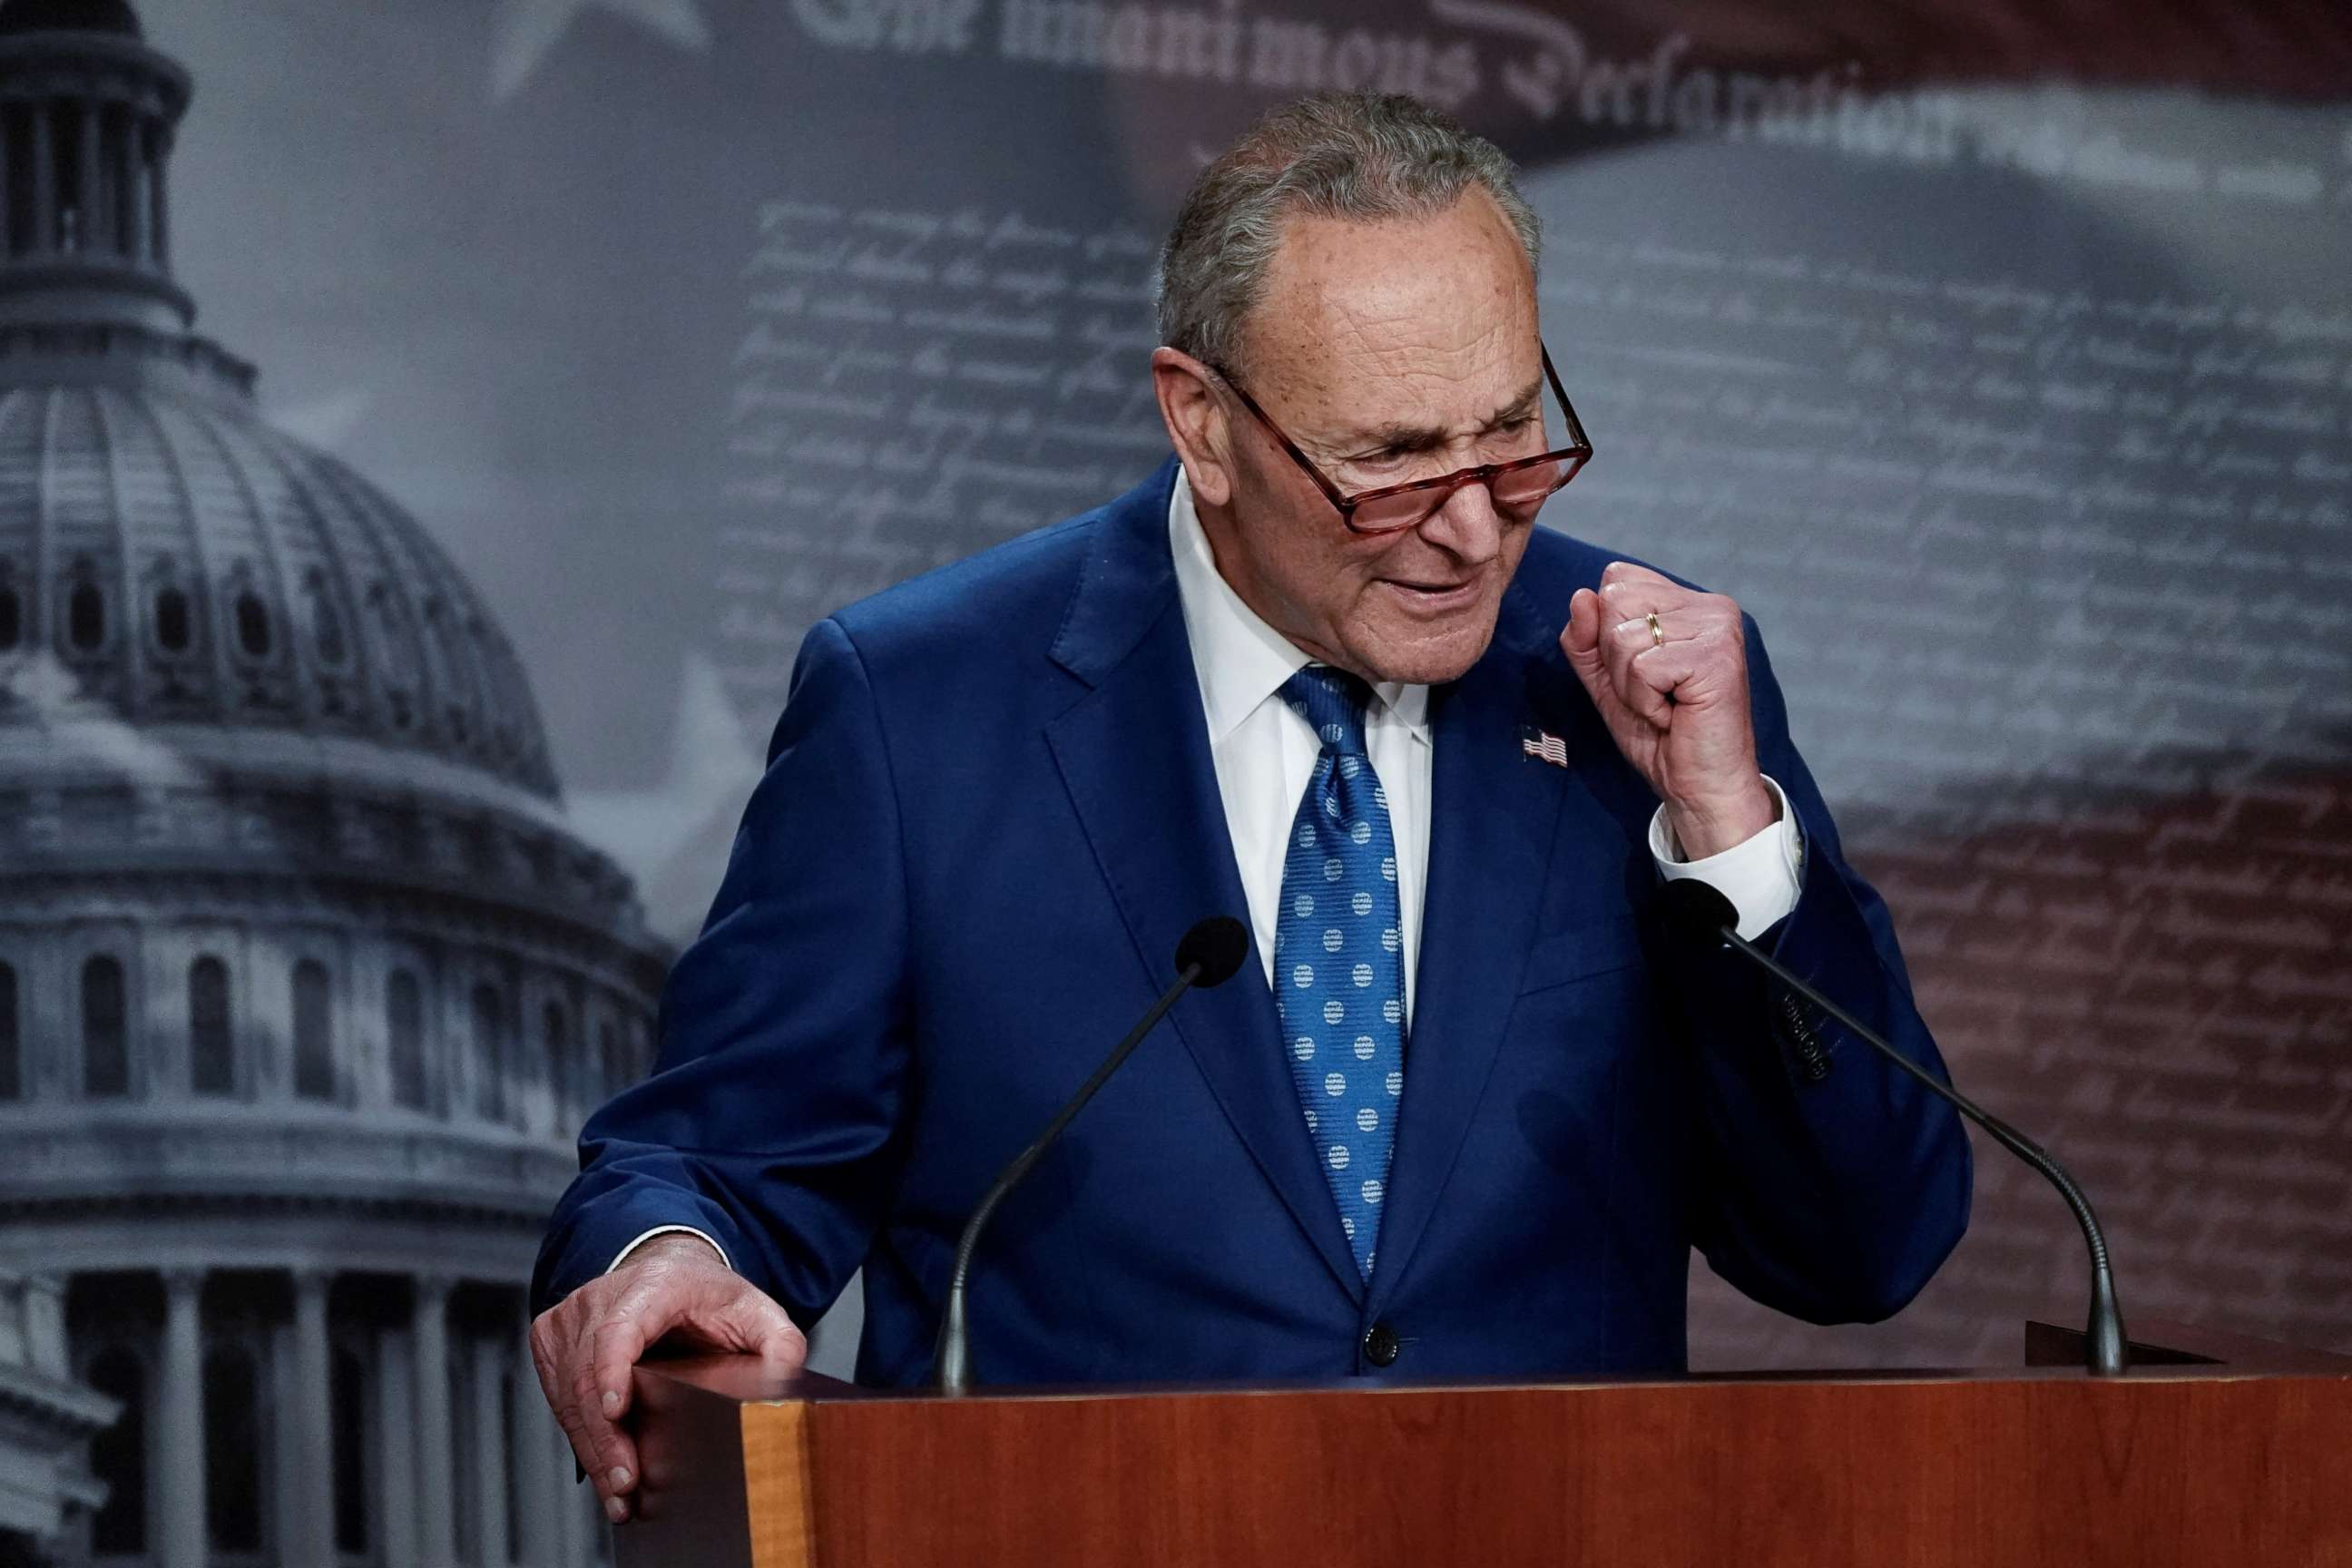 PHOTO: Senate Majority Leader Chuck Schumer speaks to the media after the 51-50 vote passed the "Inflation Reduction Act of 2022" on Capitol Hill in Washington, D.C., Aug. 7, 2022.